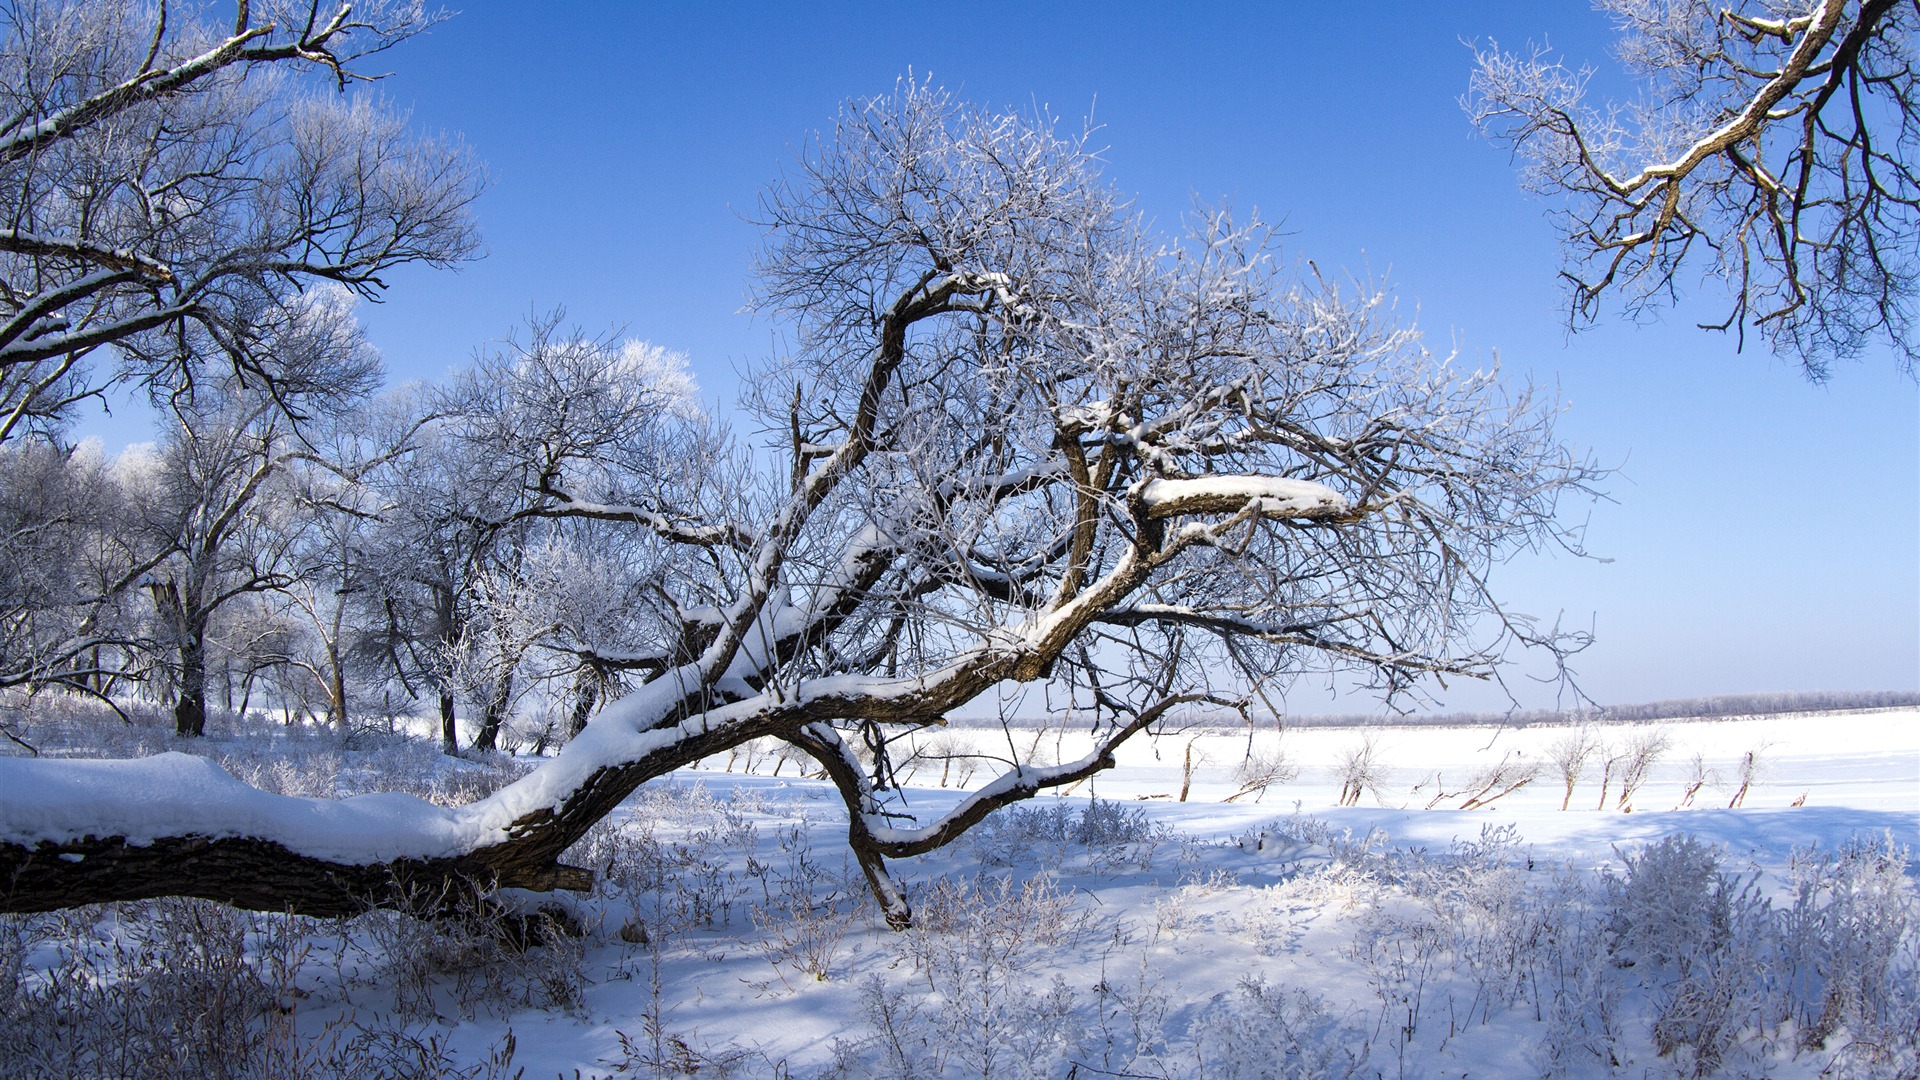 Winter Snow Covered Grassland Scenery Wallpaper - Snow , HD Wallpaper & Backgrounds